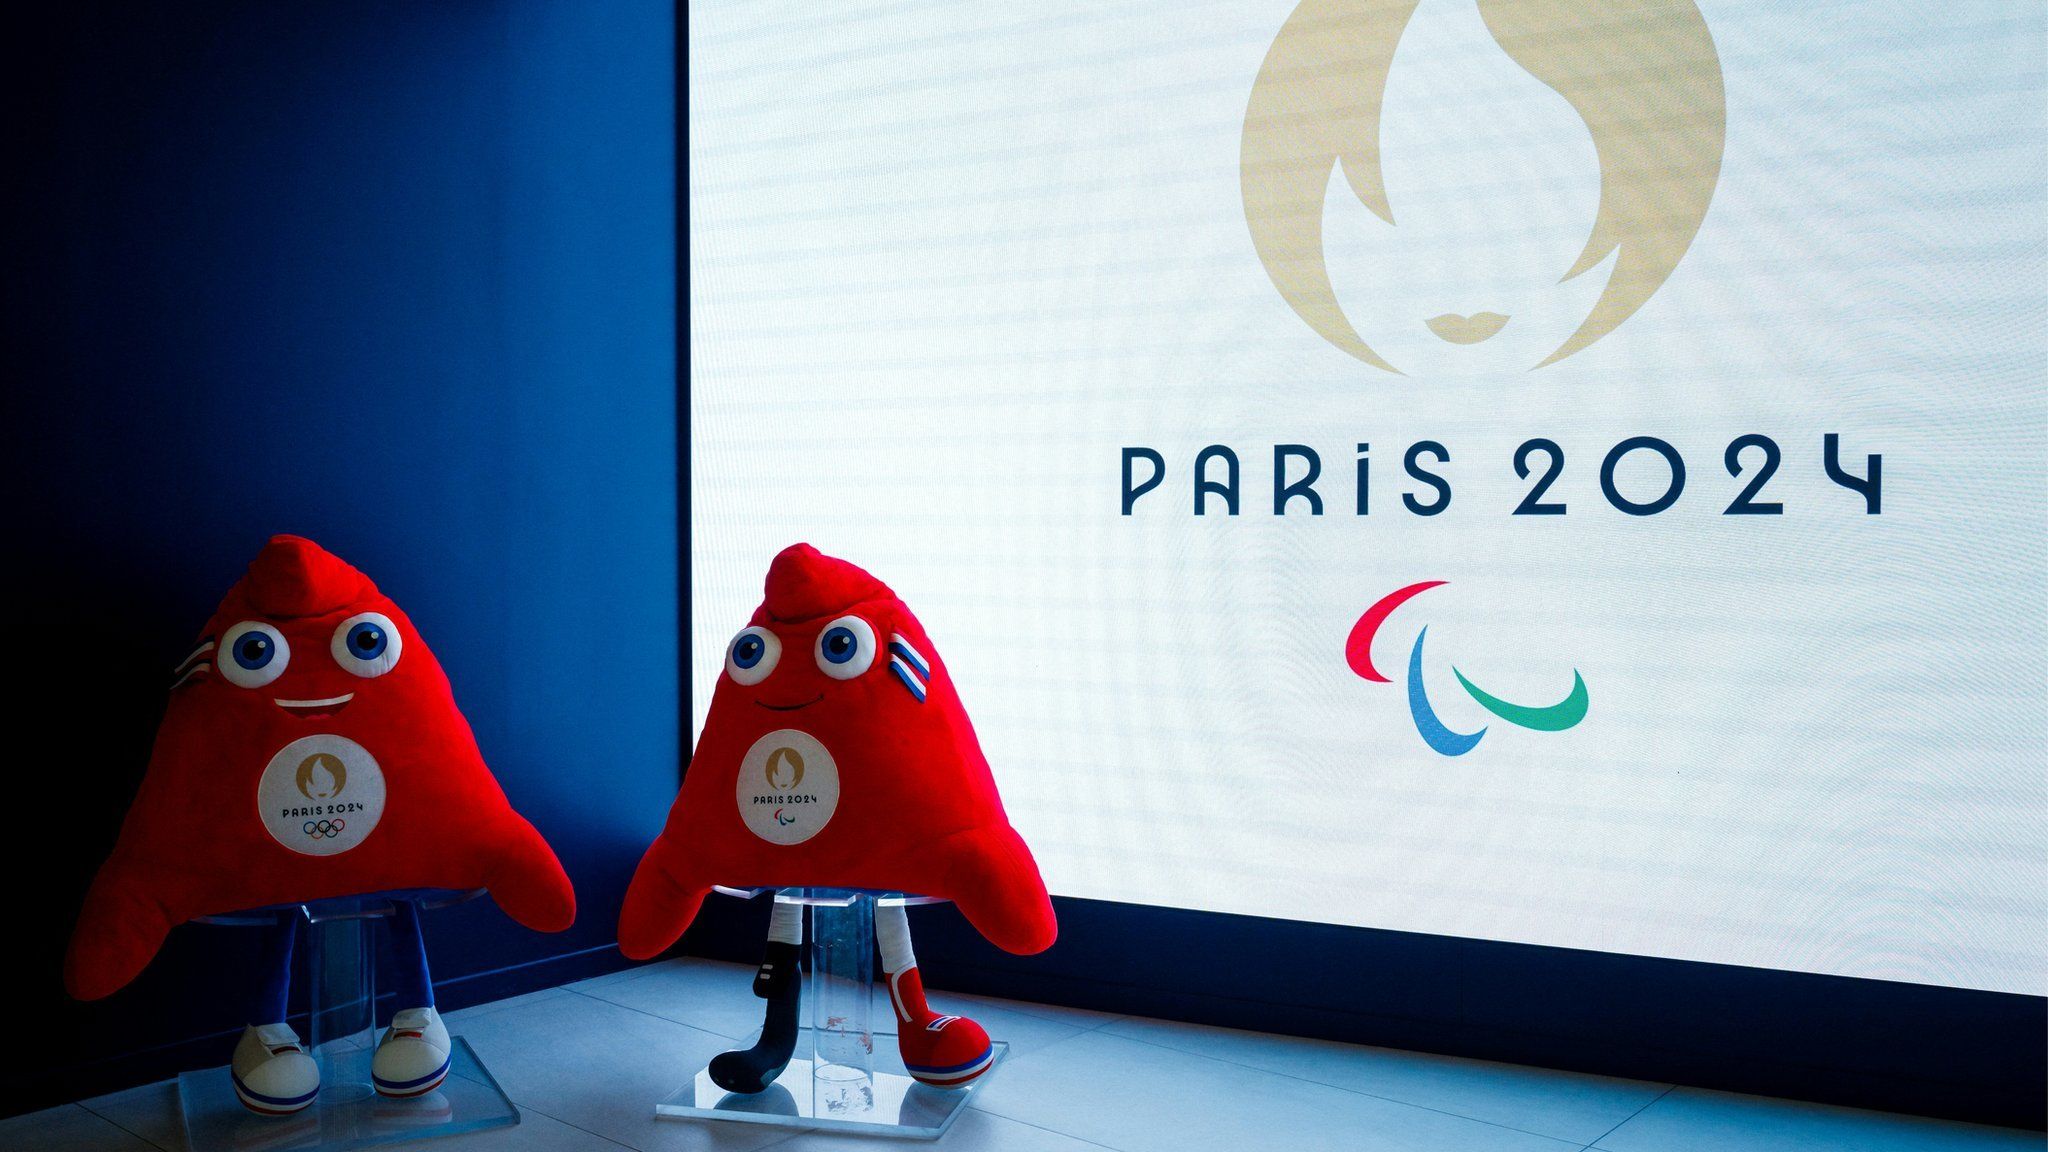 The Paris Olympic and Paralympic mascots in front of the Paralympic logo